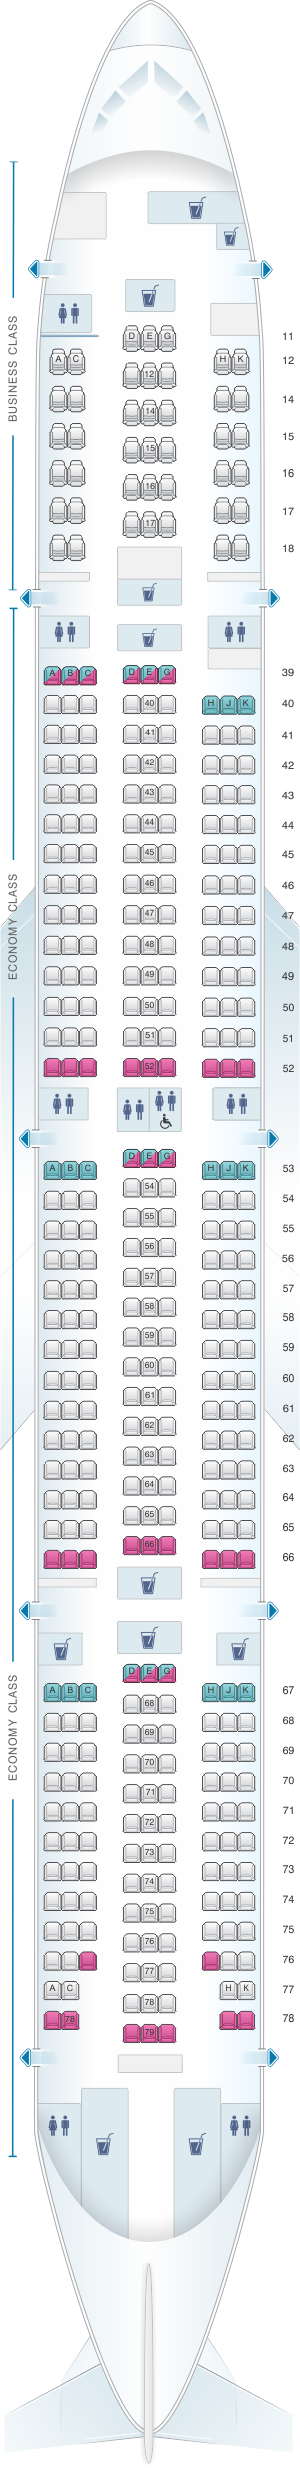 Seat map for Cathay Pacific Airways Boeing B777 300 (73Z)